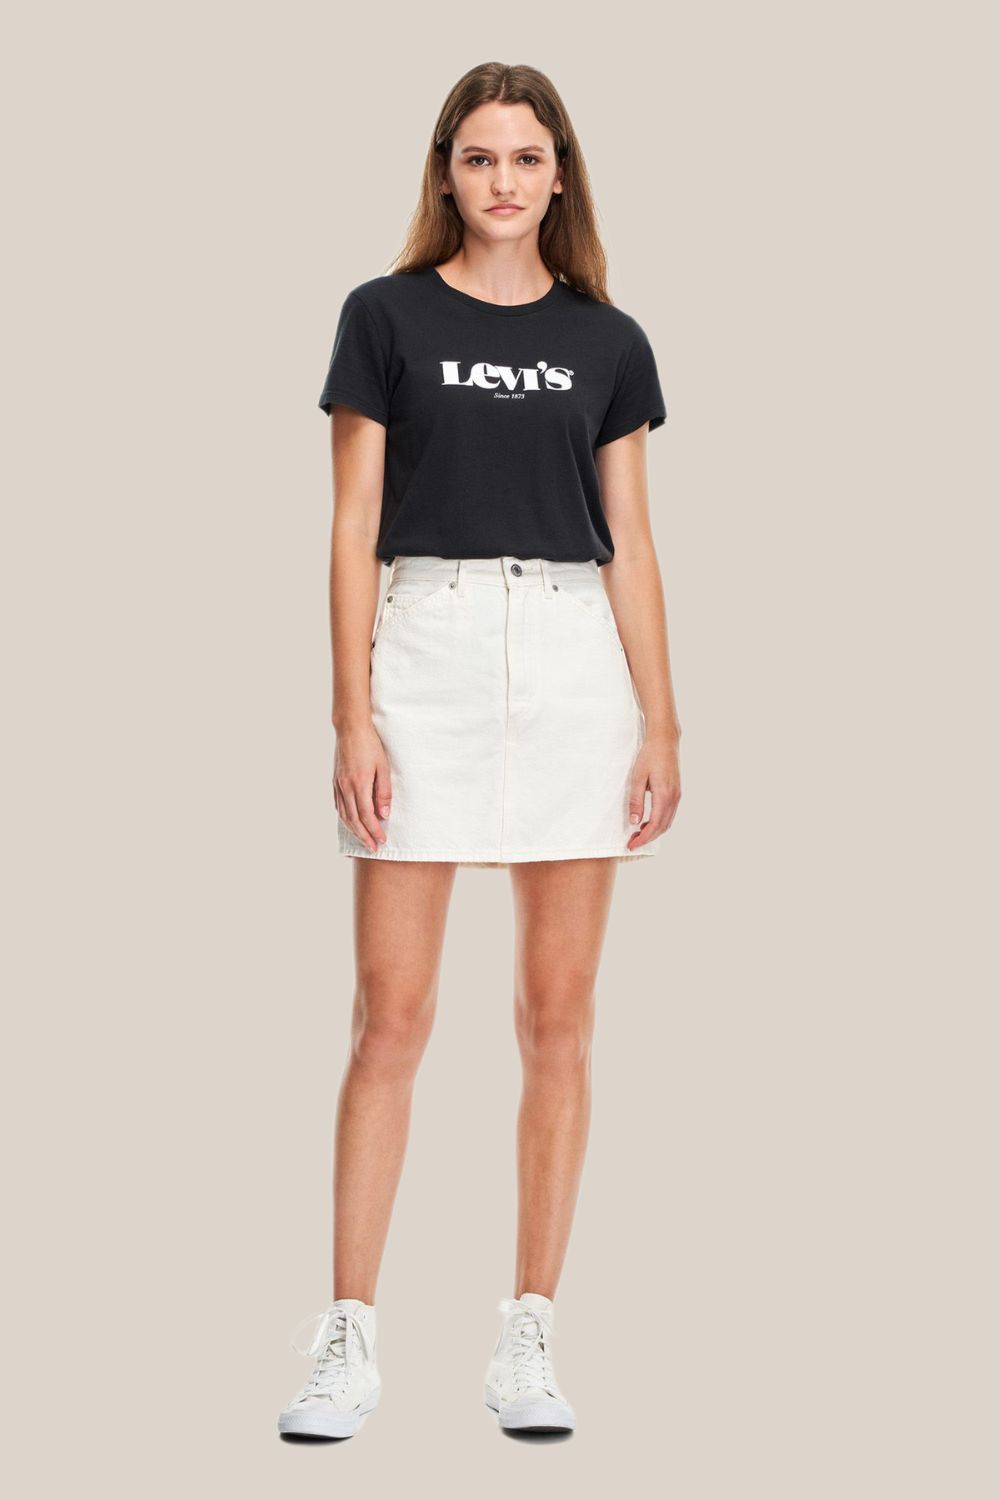 Levis Mini Skirts - Buy Levis Mini Skirts online in India